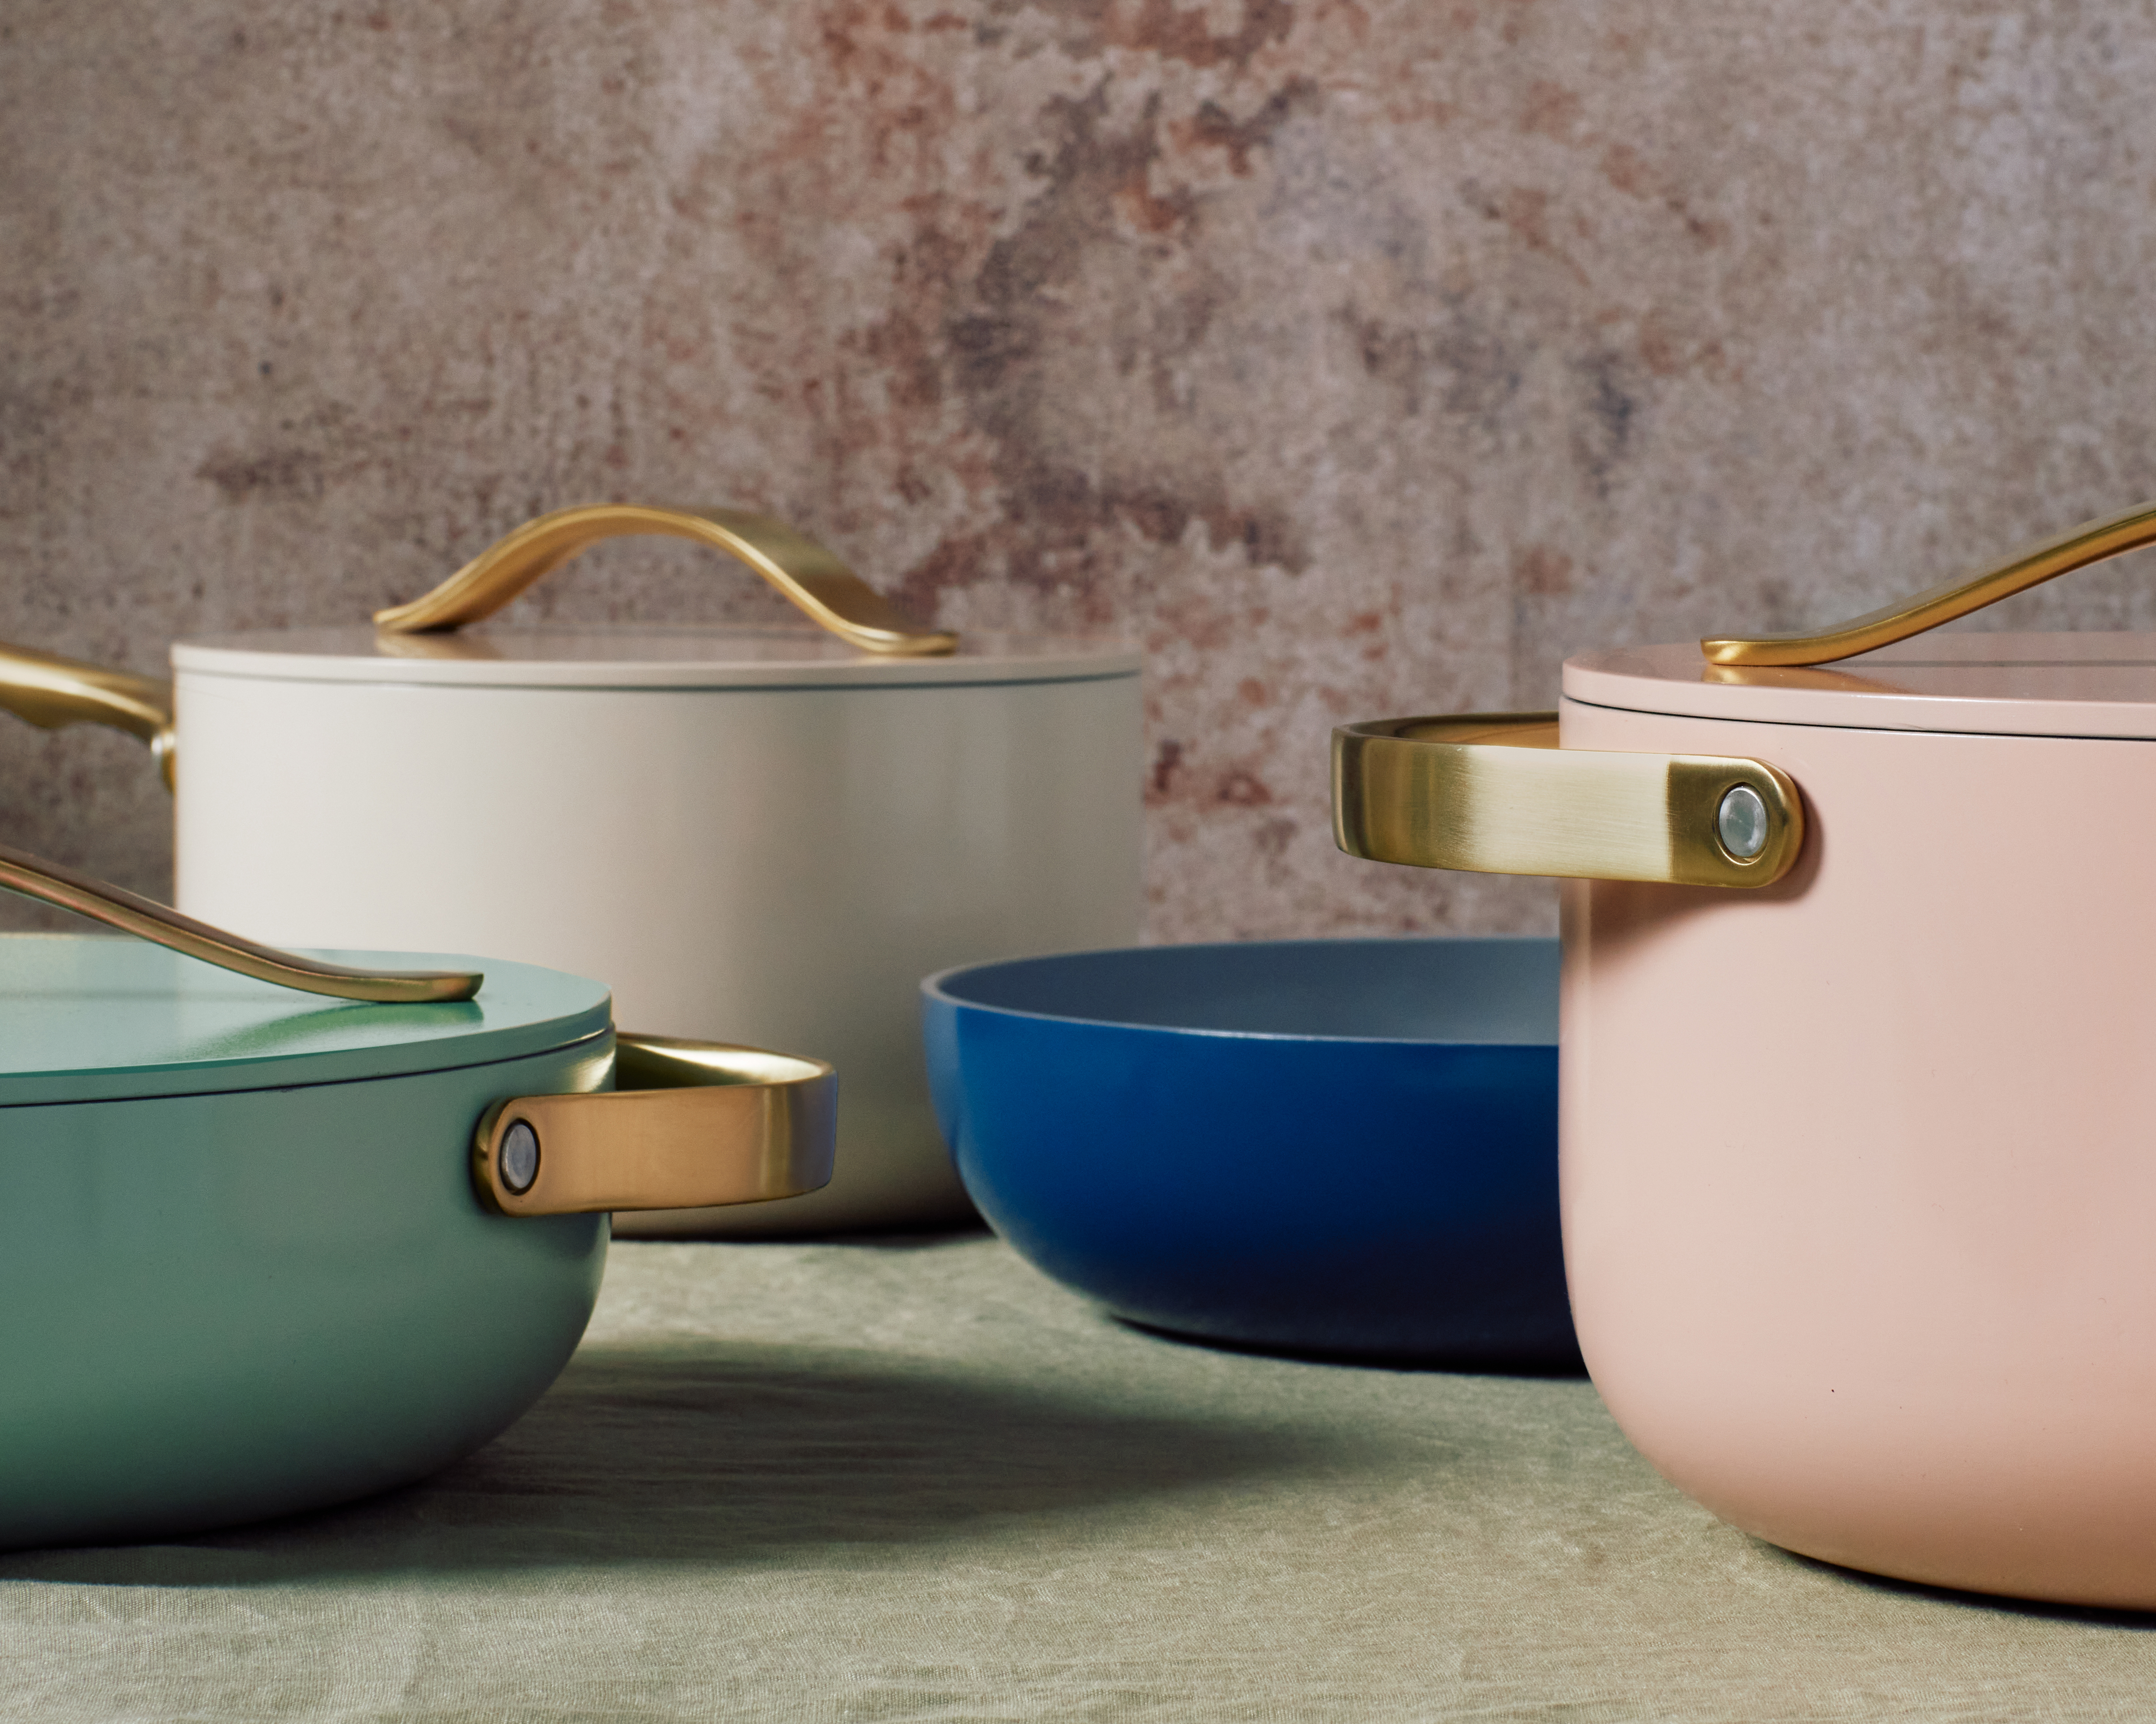 Caraway cookware launches ceramic Squareware collection - Reviewed